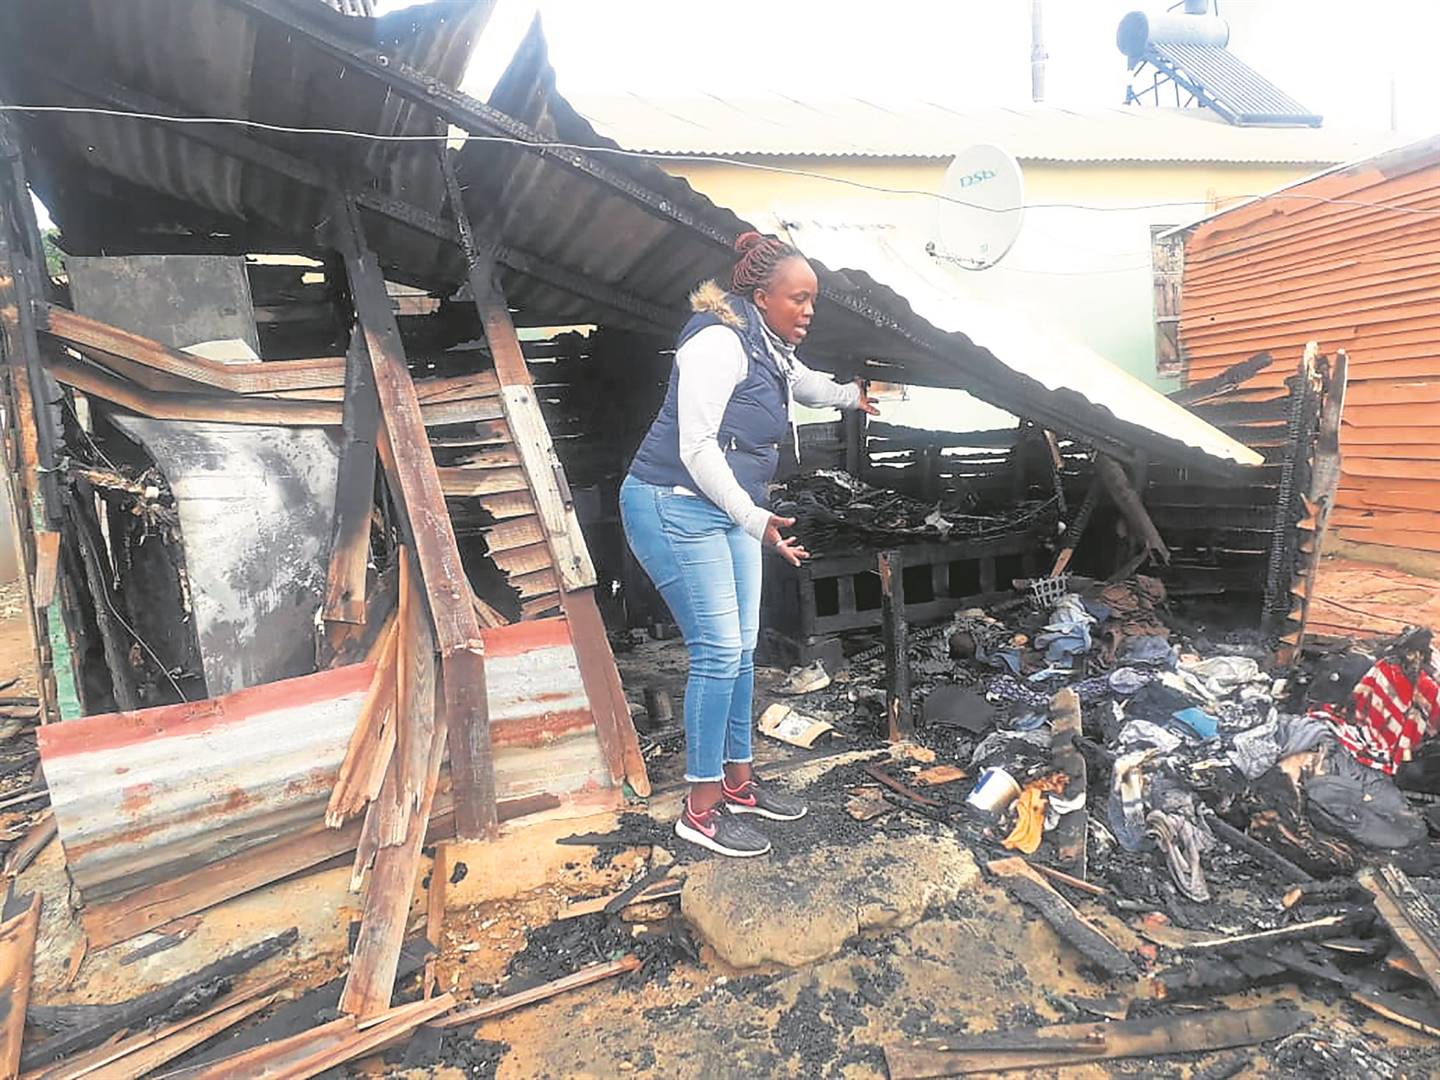 LUCKY ESCAPE: Asandiswa Jalajala opened an arson case against her boyfriend, who allegedly burnt down her shack.  Photo by Lulekwa Mbadamane